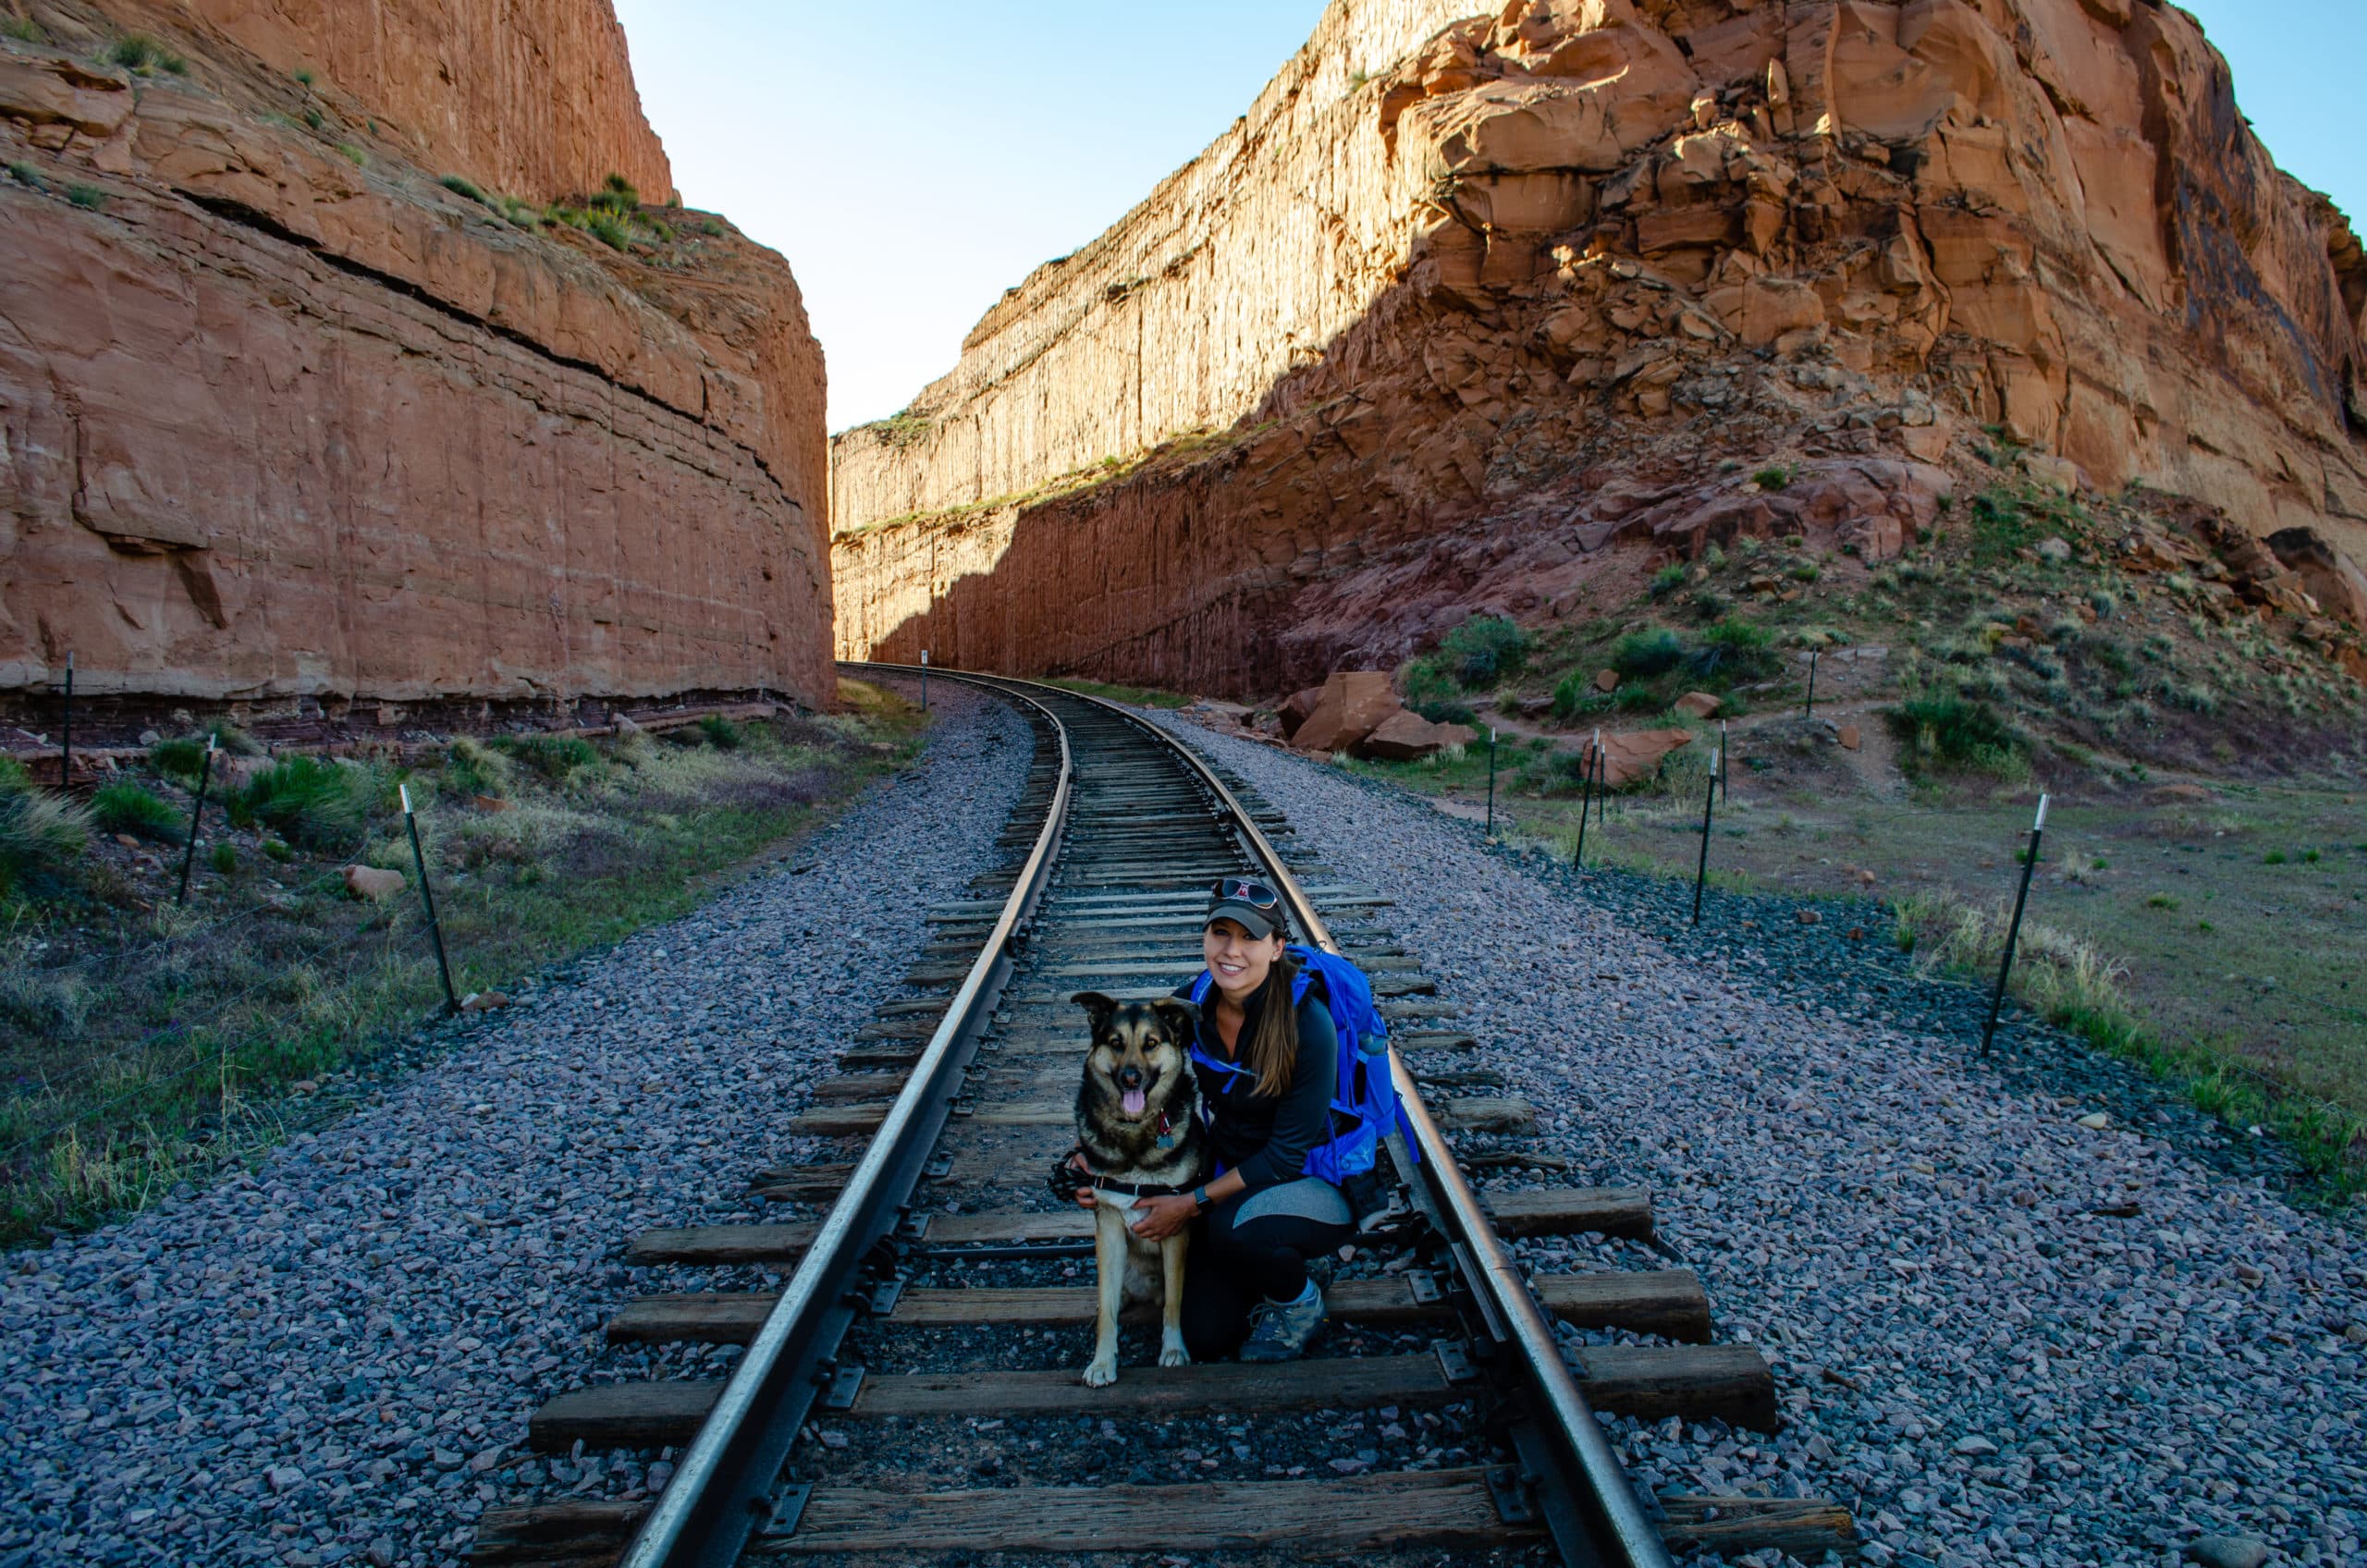 Cass and Jasper from Tails of Wanderlust in Front of a Mountain on Old Train Tracks